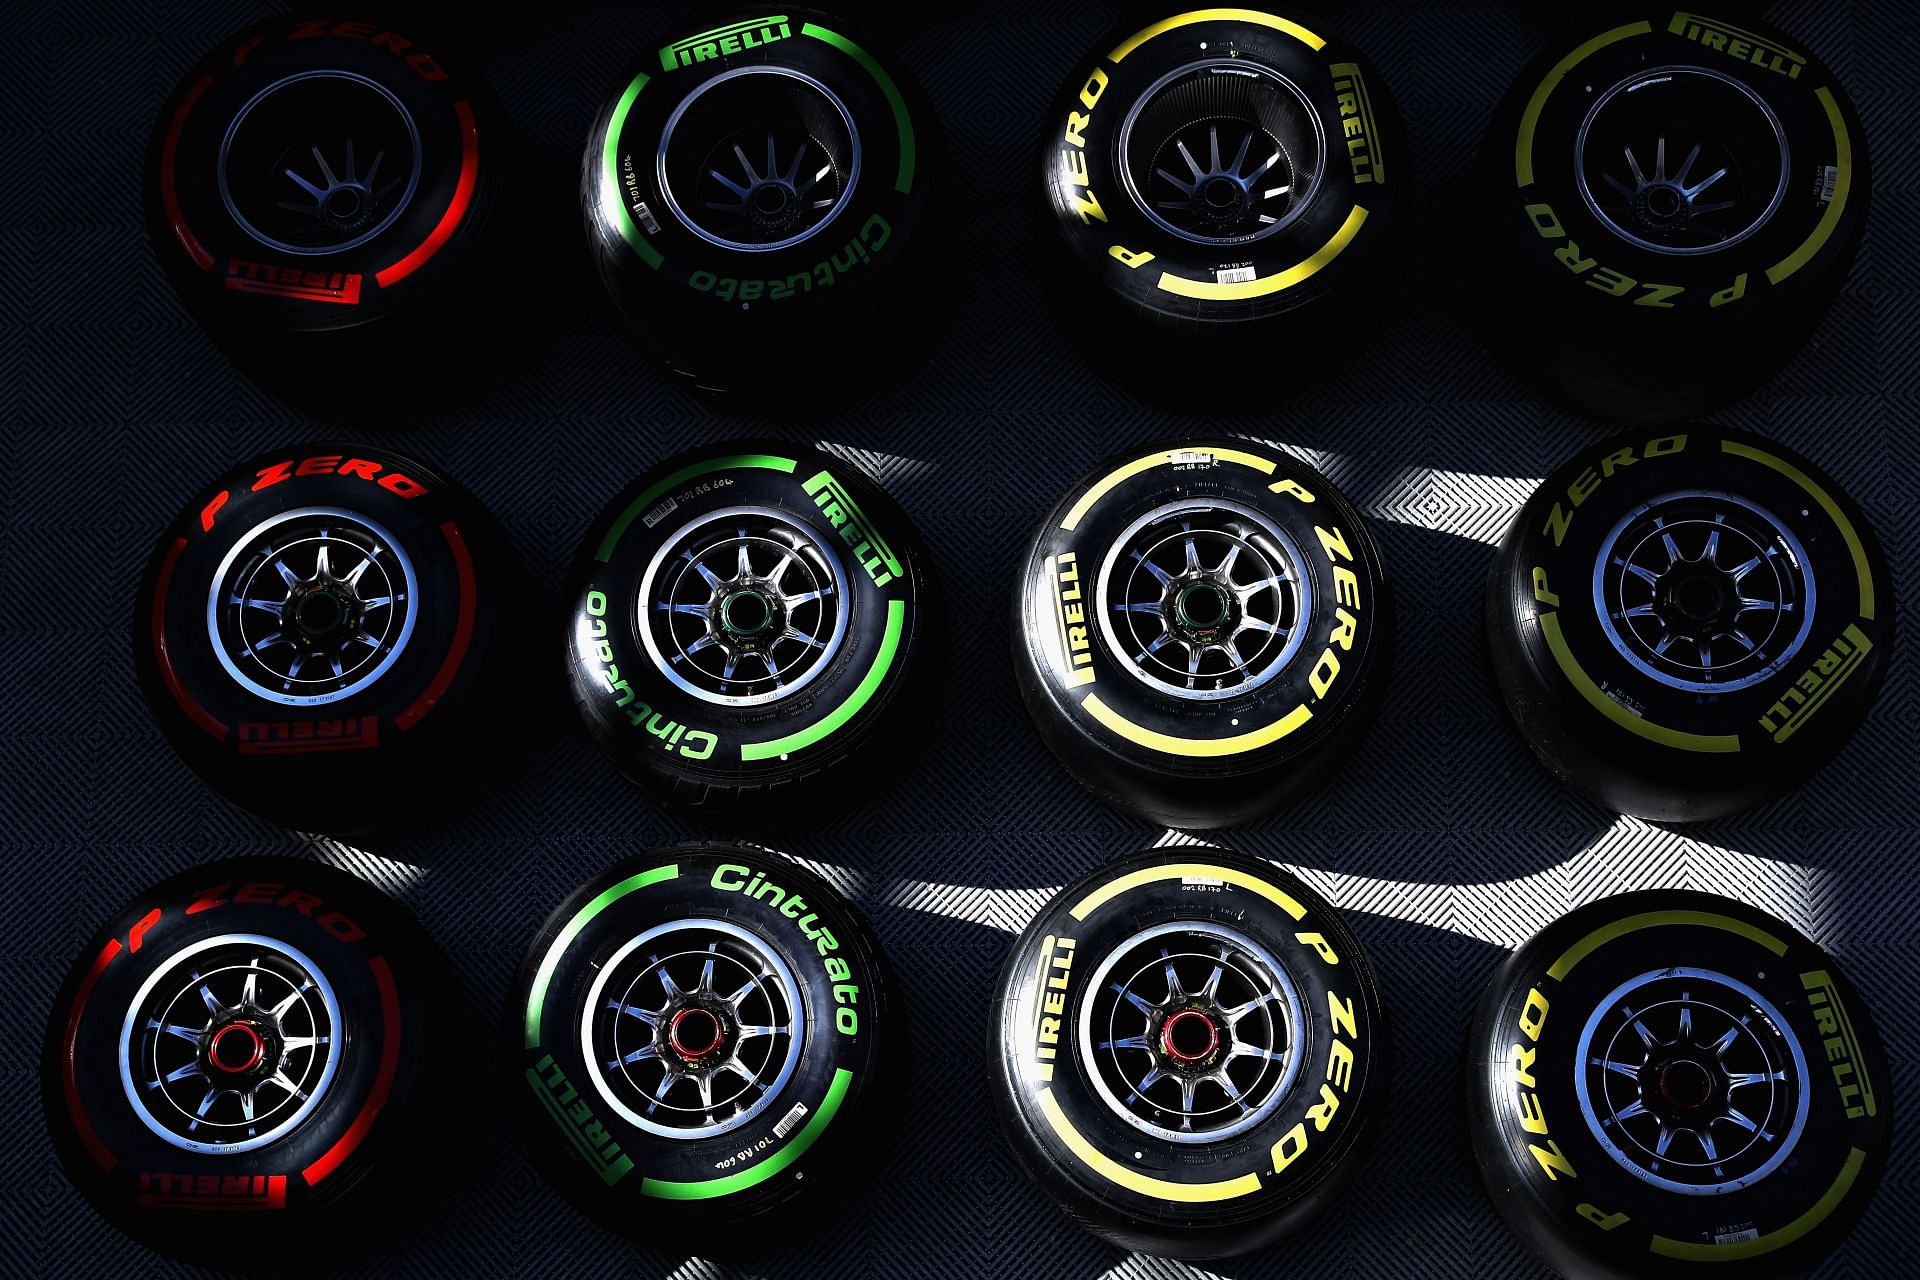 Pirelli recently confirmed the dates for testing the 2023 season tires